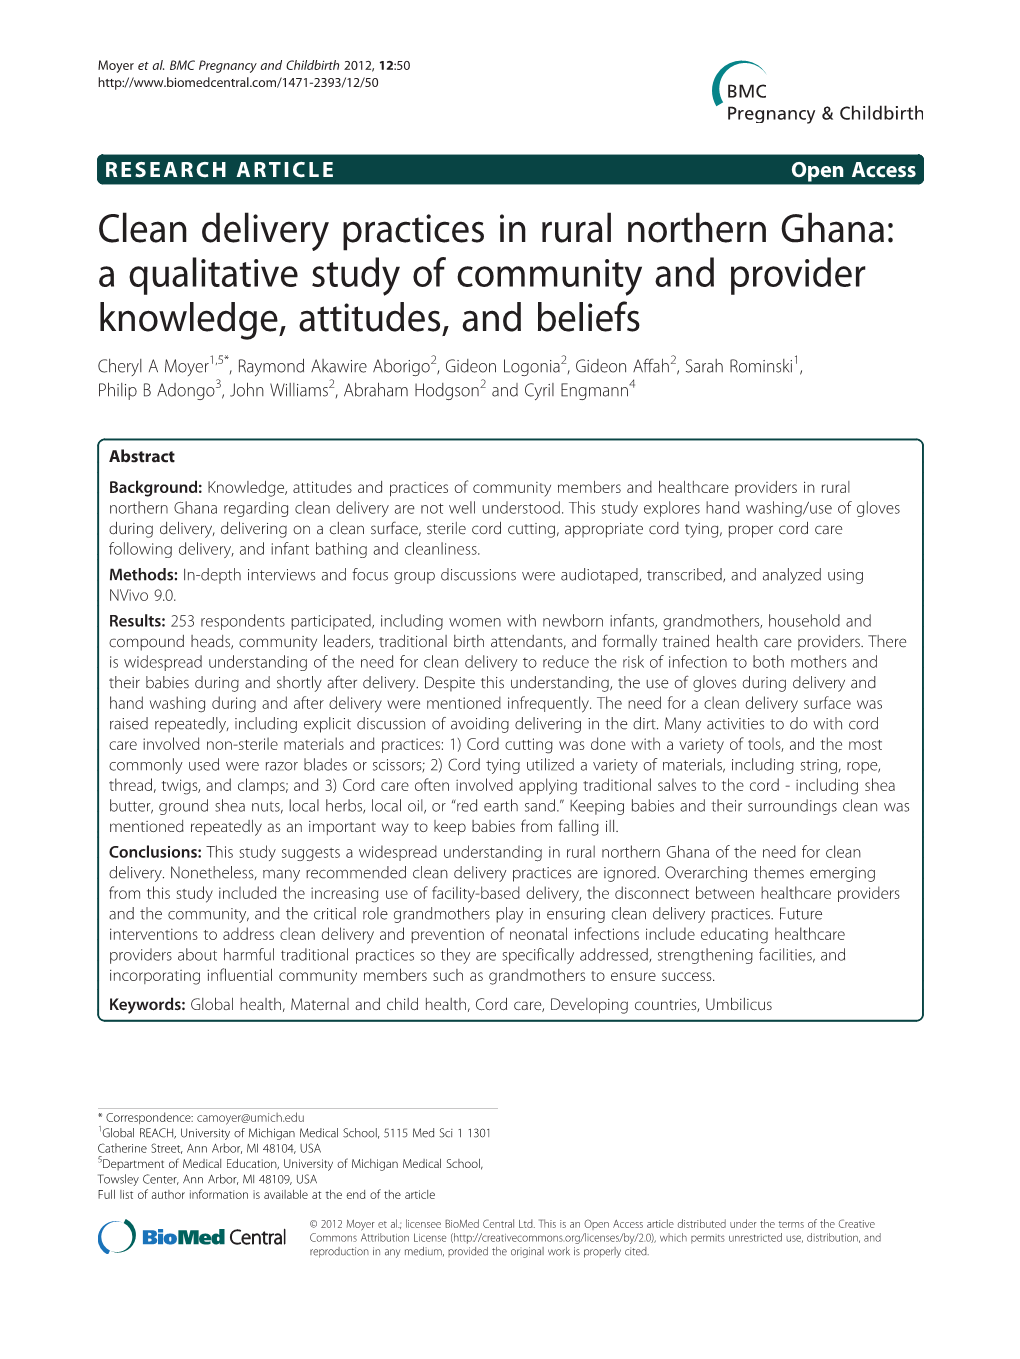 Clean Delivery Practices in Rural Northern Ghana